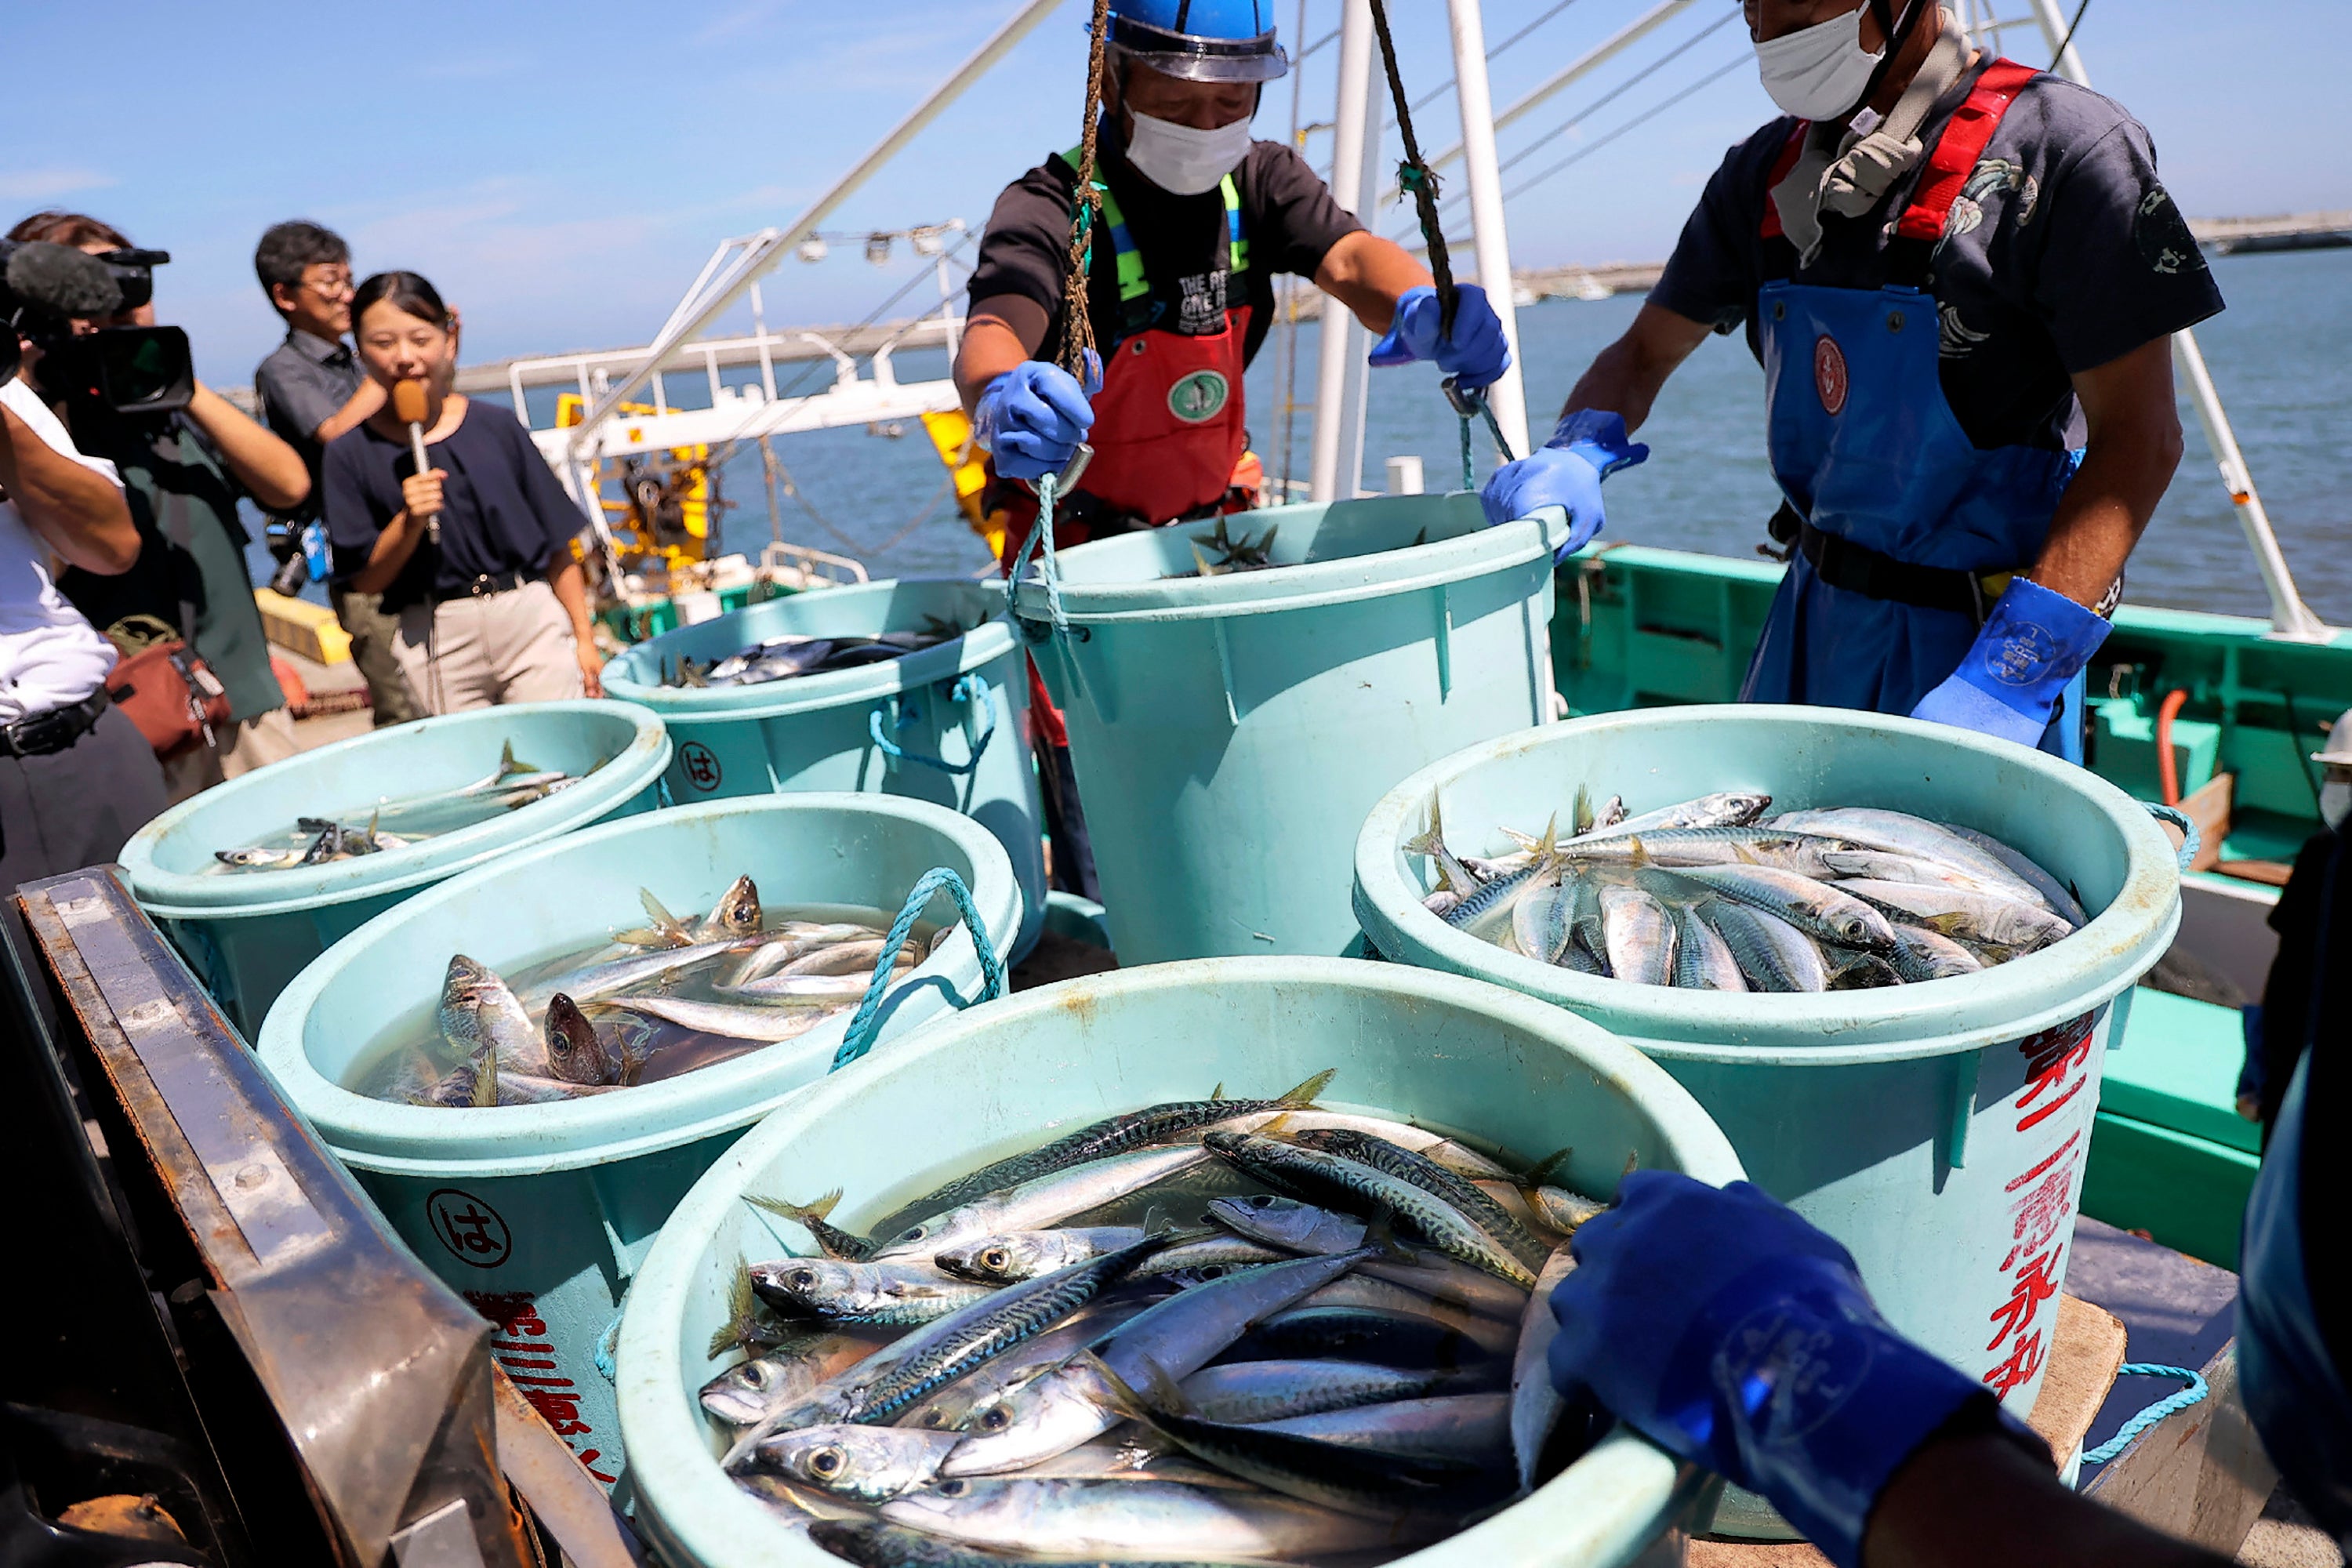 Japanese Fisheries Become China's Newest Geopolitical Target